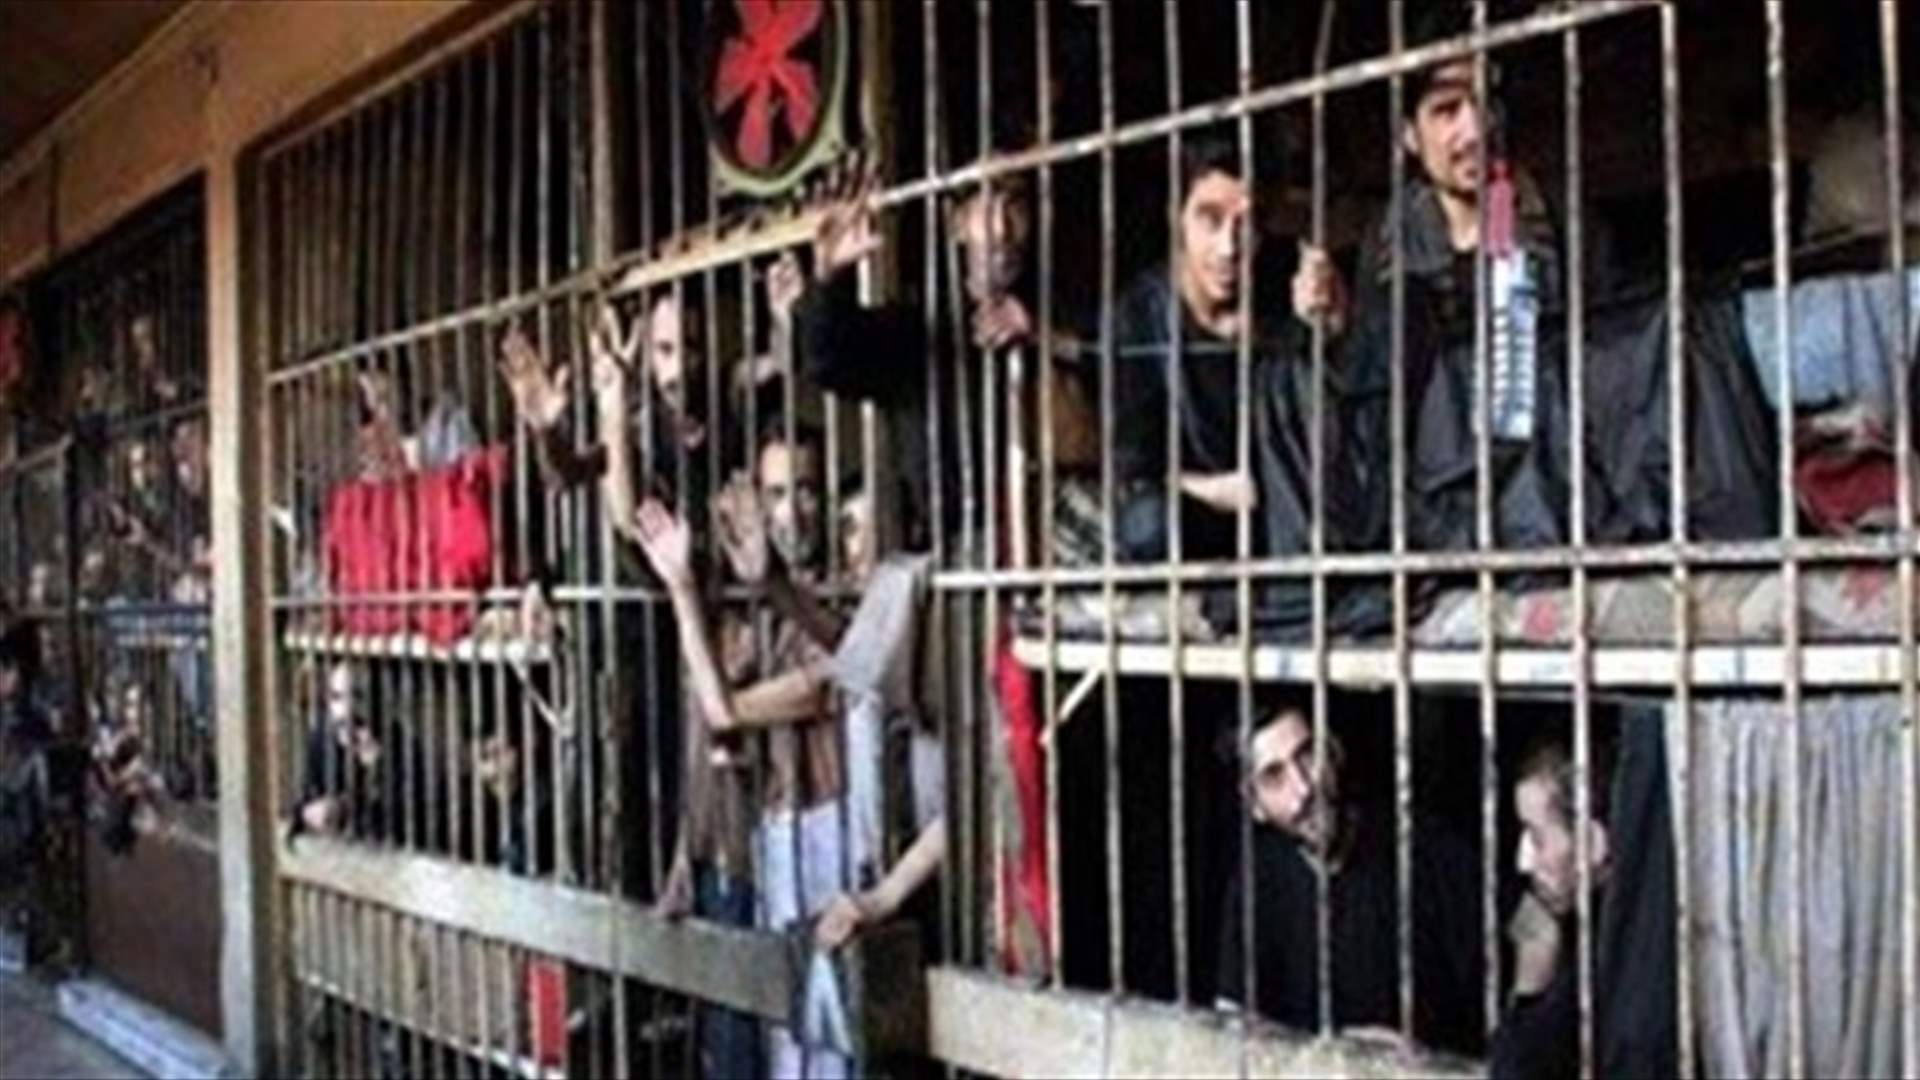 Syrian prisoners in deal to end mutiny -rights activists